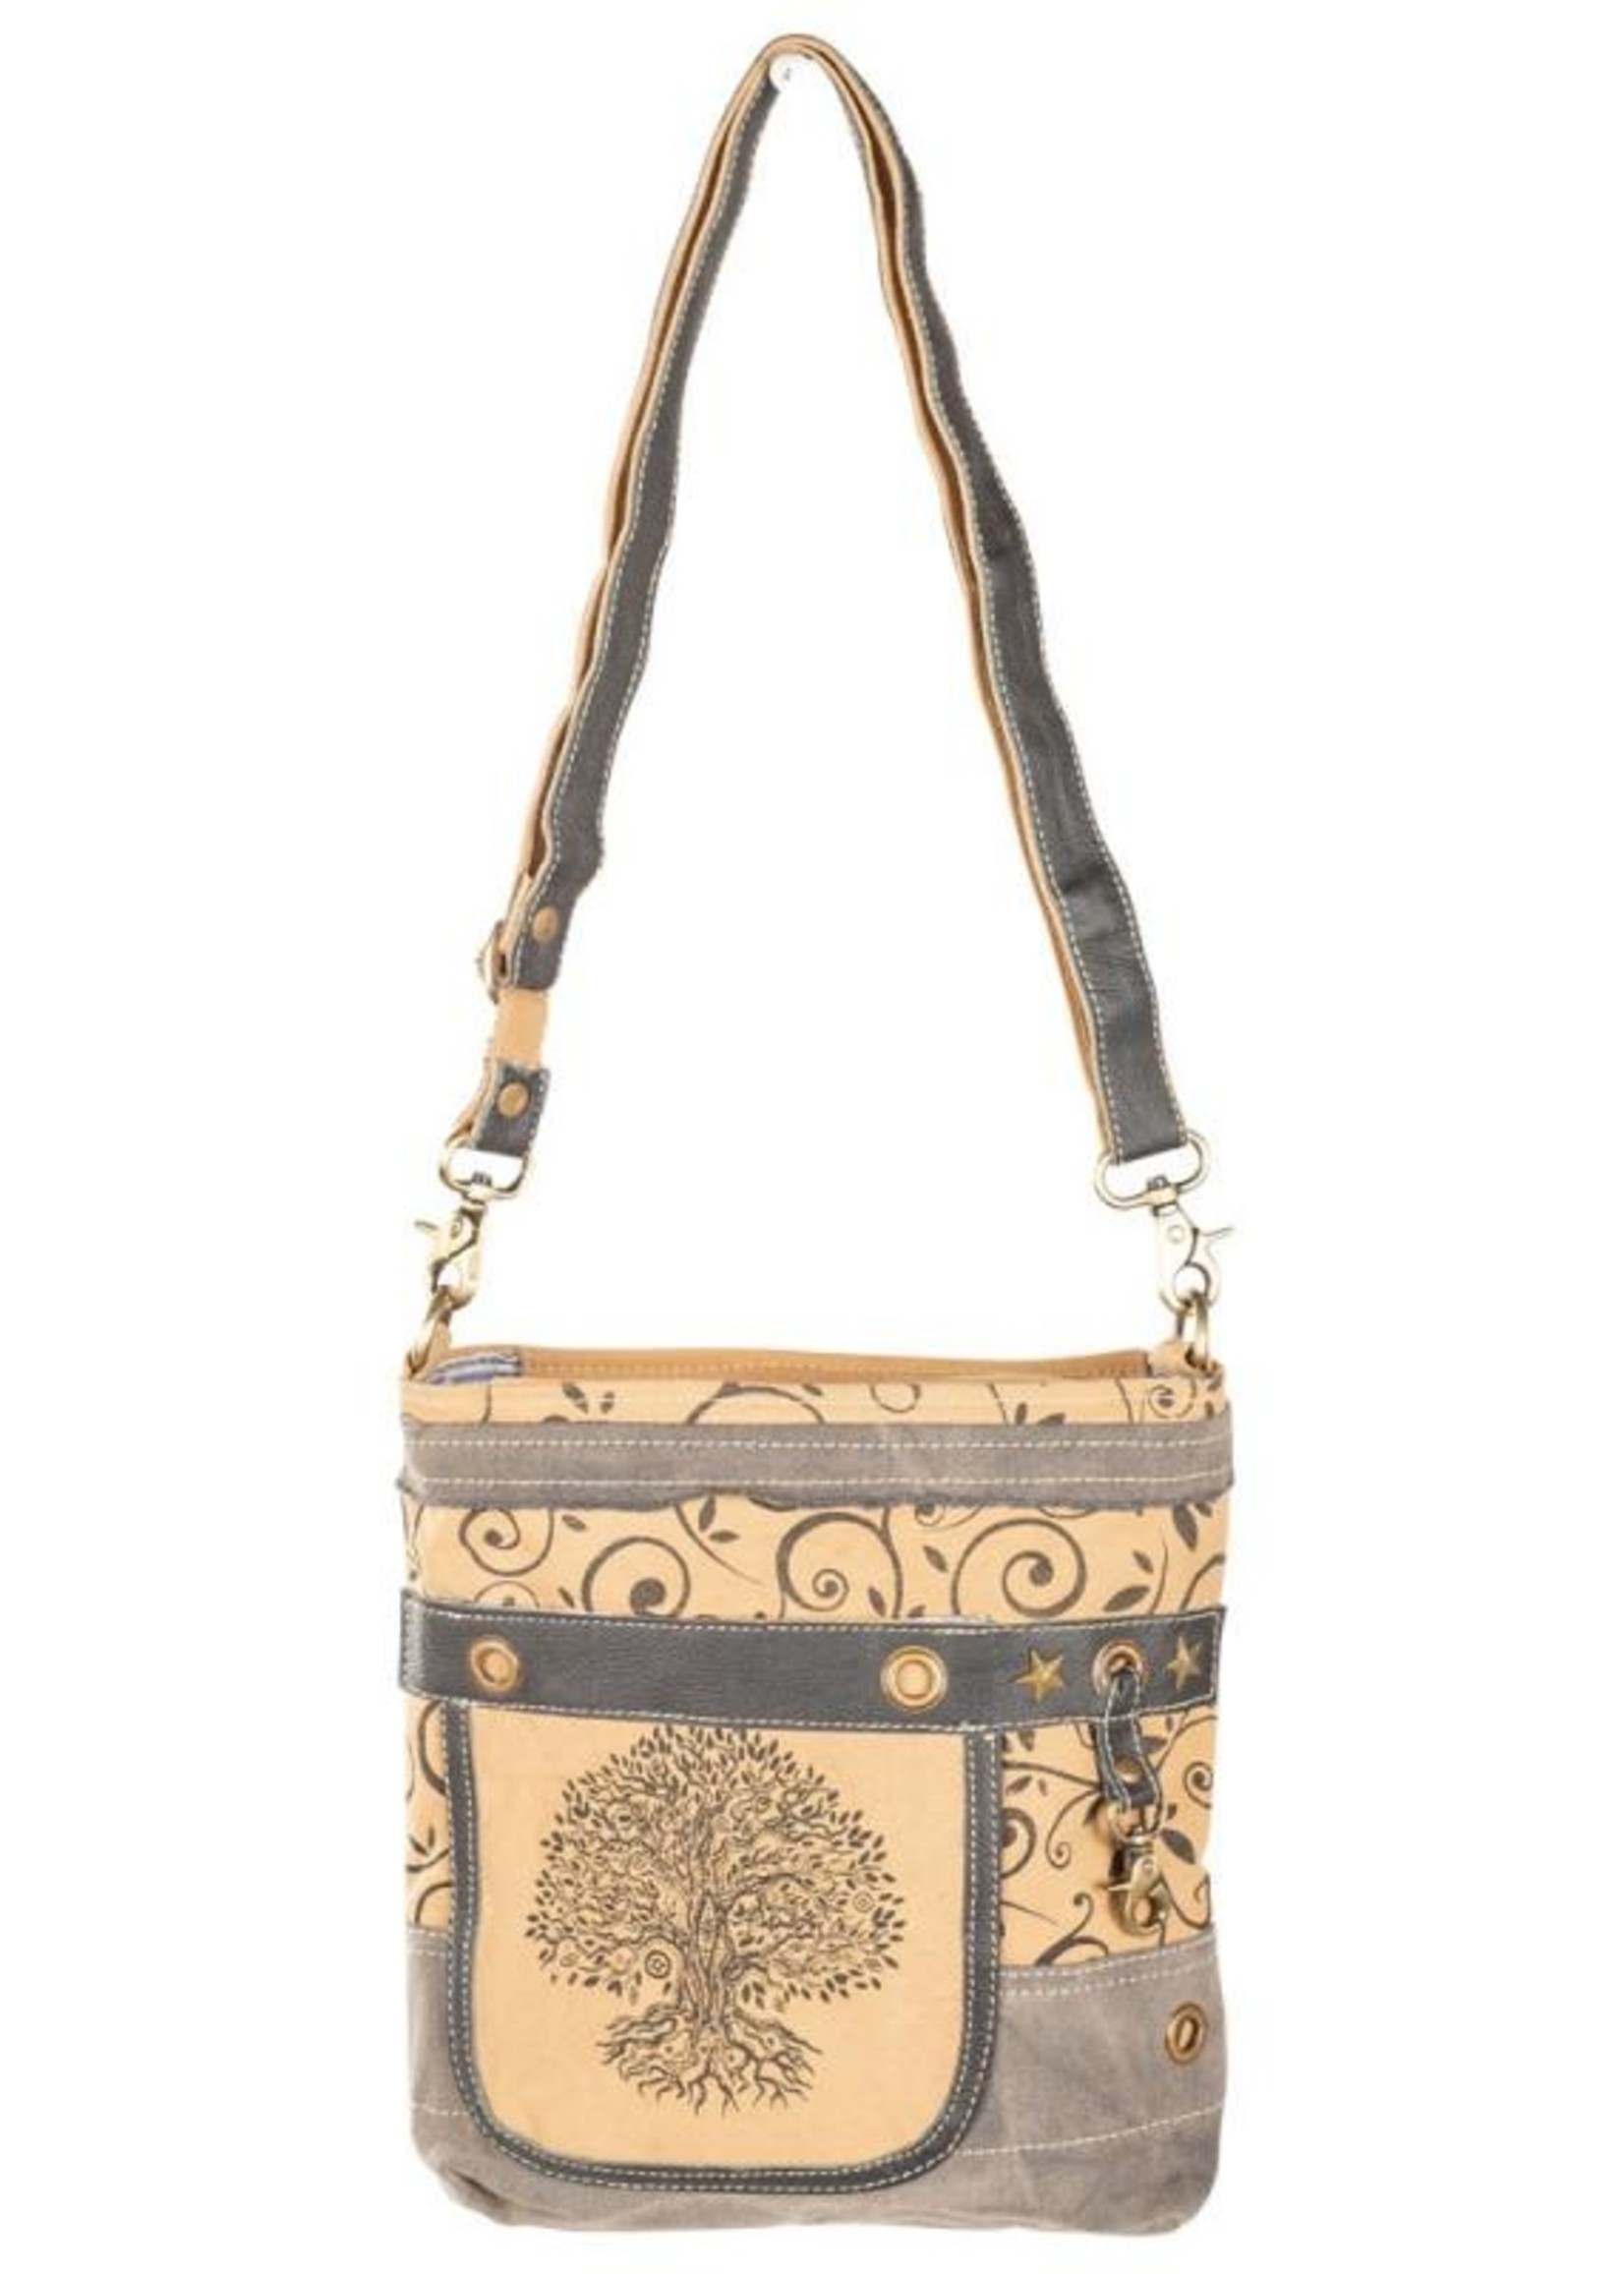 Tree of Life Shoulder Bag Canvas, leather  & Recycled Rug 12" x 12" x 2.75"